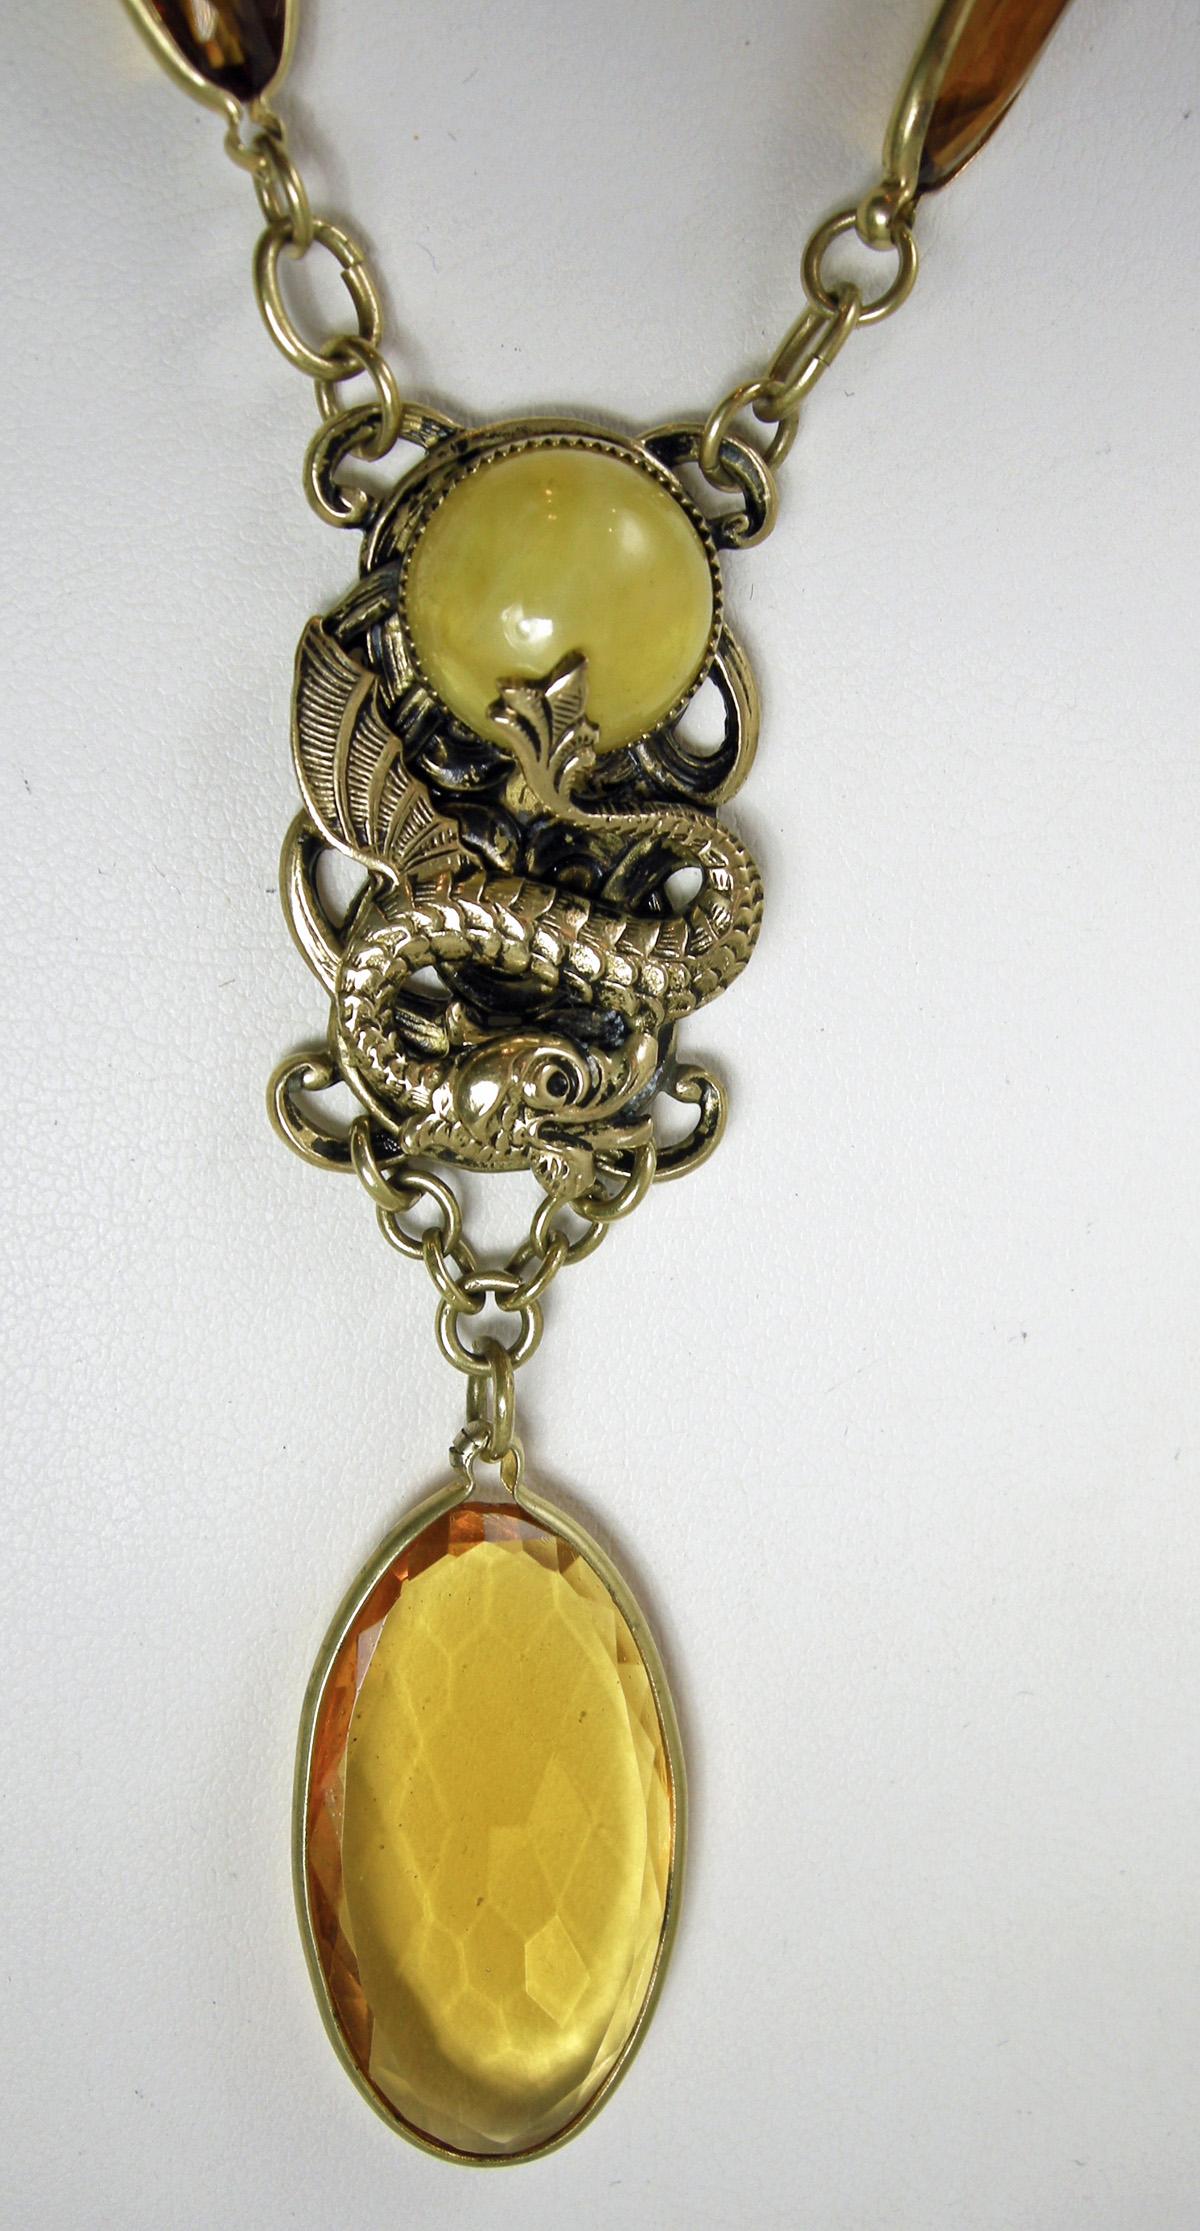 This beautiful old Czech necklace is from the 1930s.  It a gold tone chain attached to elongated faux citrine bezel links streaming down to the center where there is a yellow glass stone being held by a gold tone dragon.  Hanging down from the